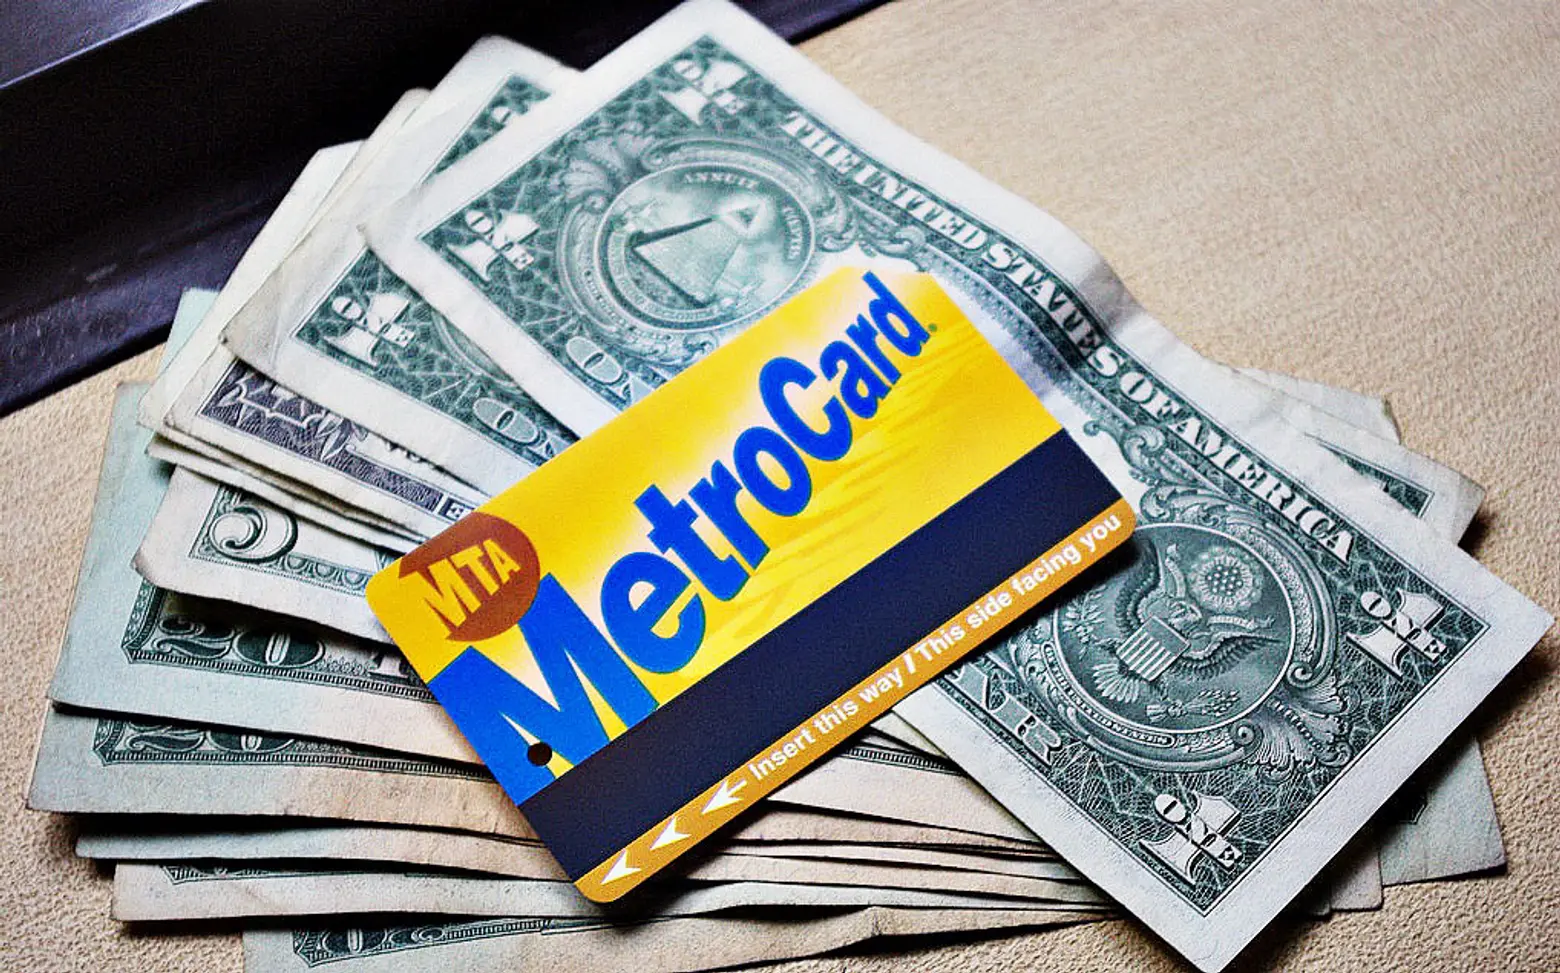 MTA Likely to Implement Fare Hike to $3 by 2017